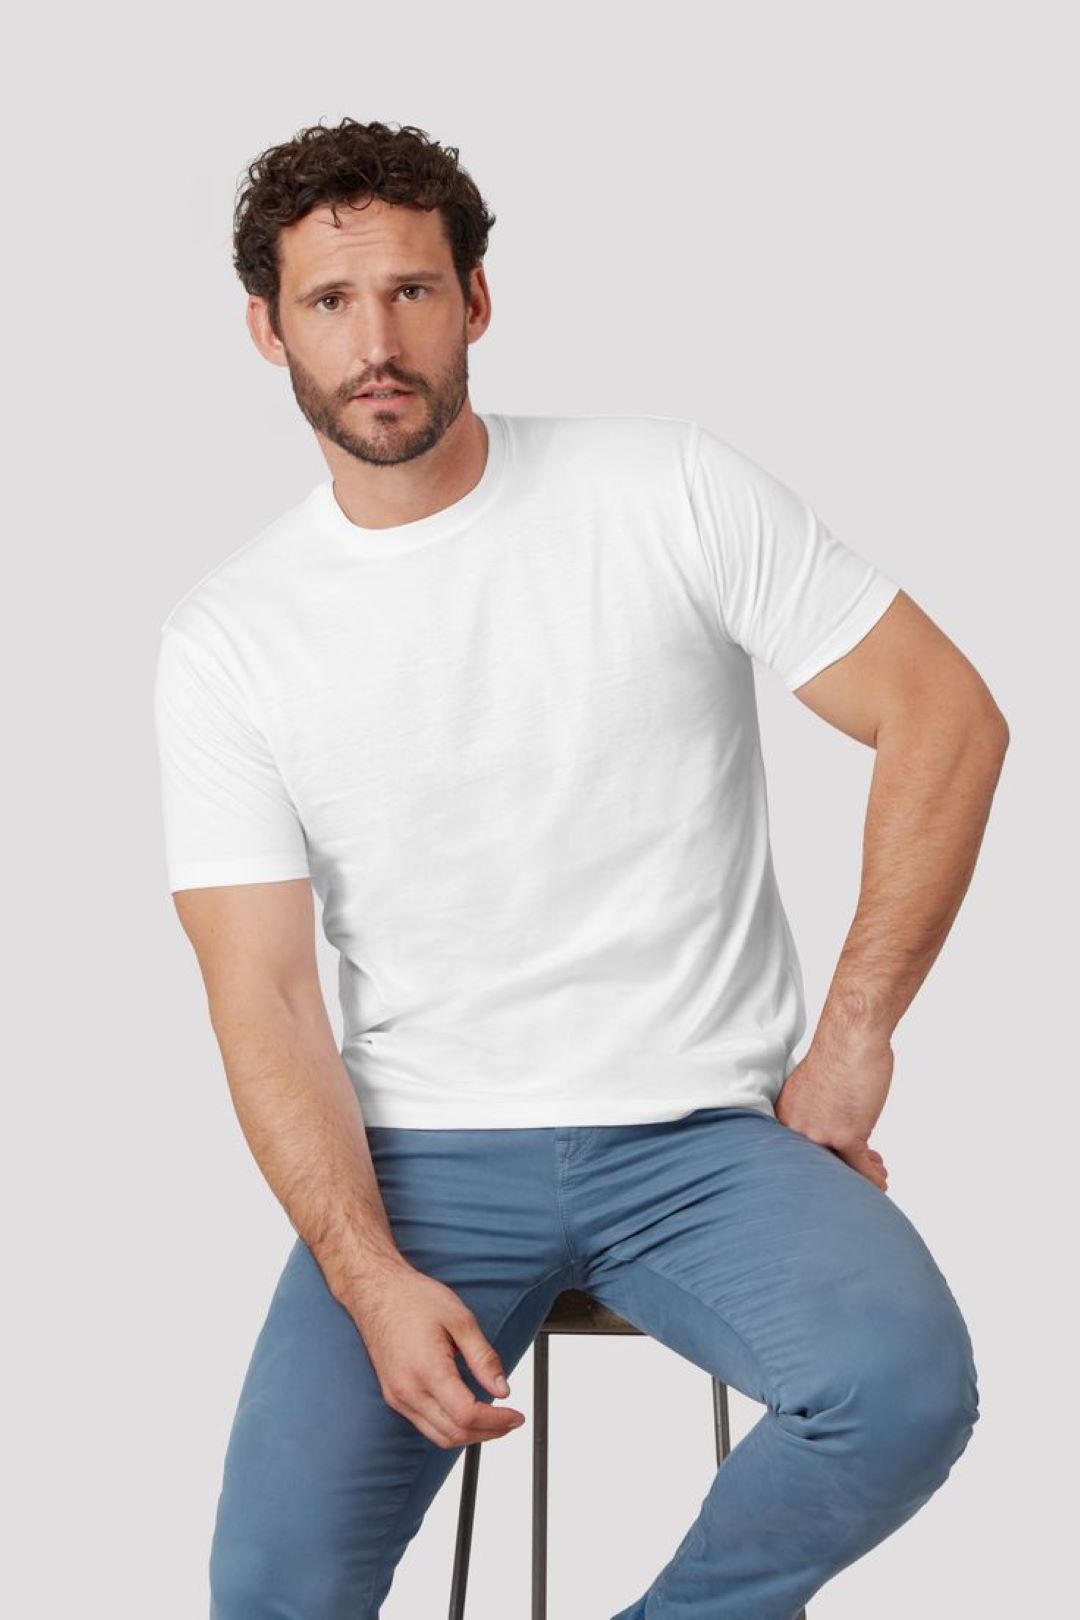 Model wearing Strong & durable Supima Cotton T-shirt